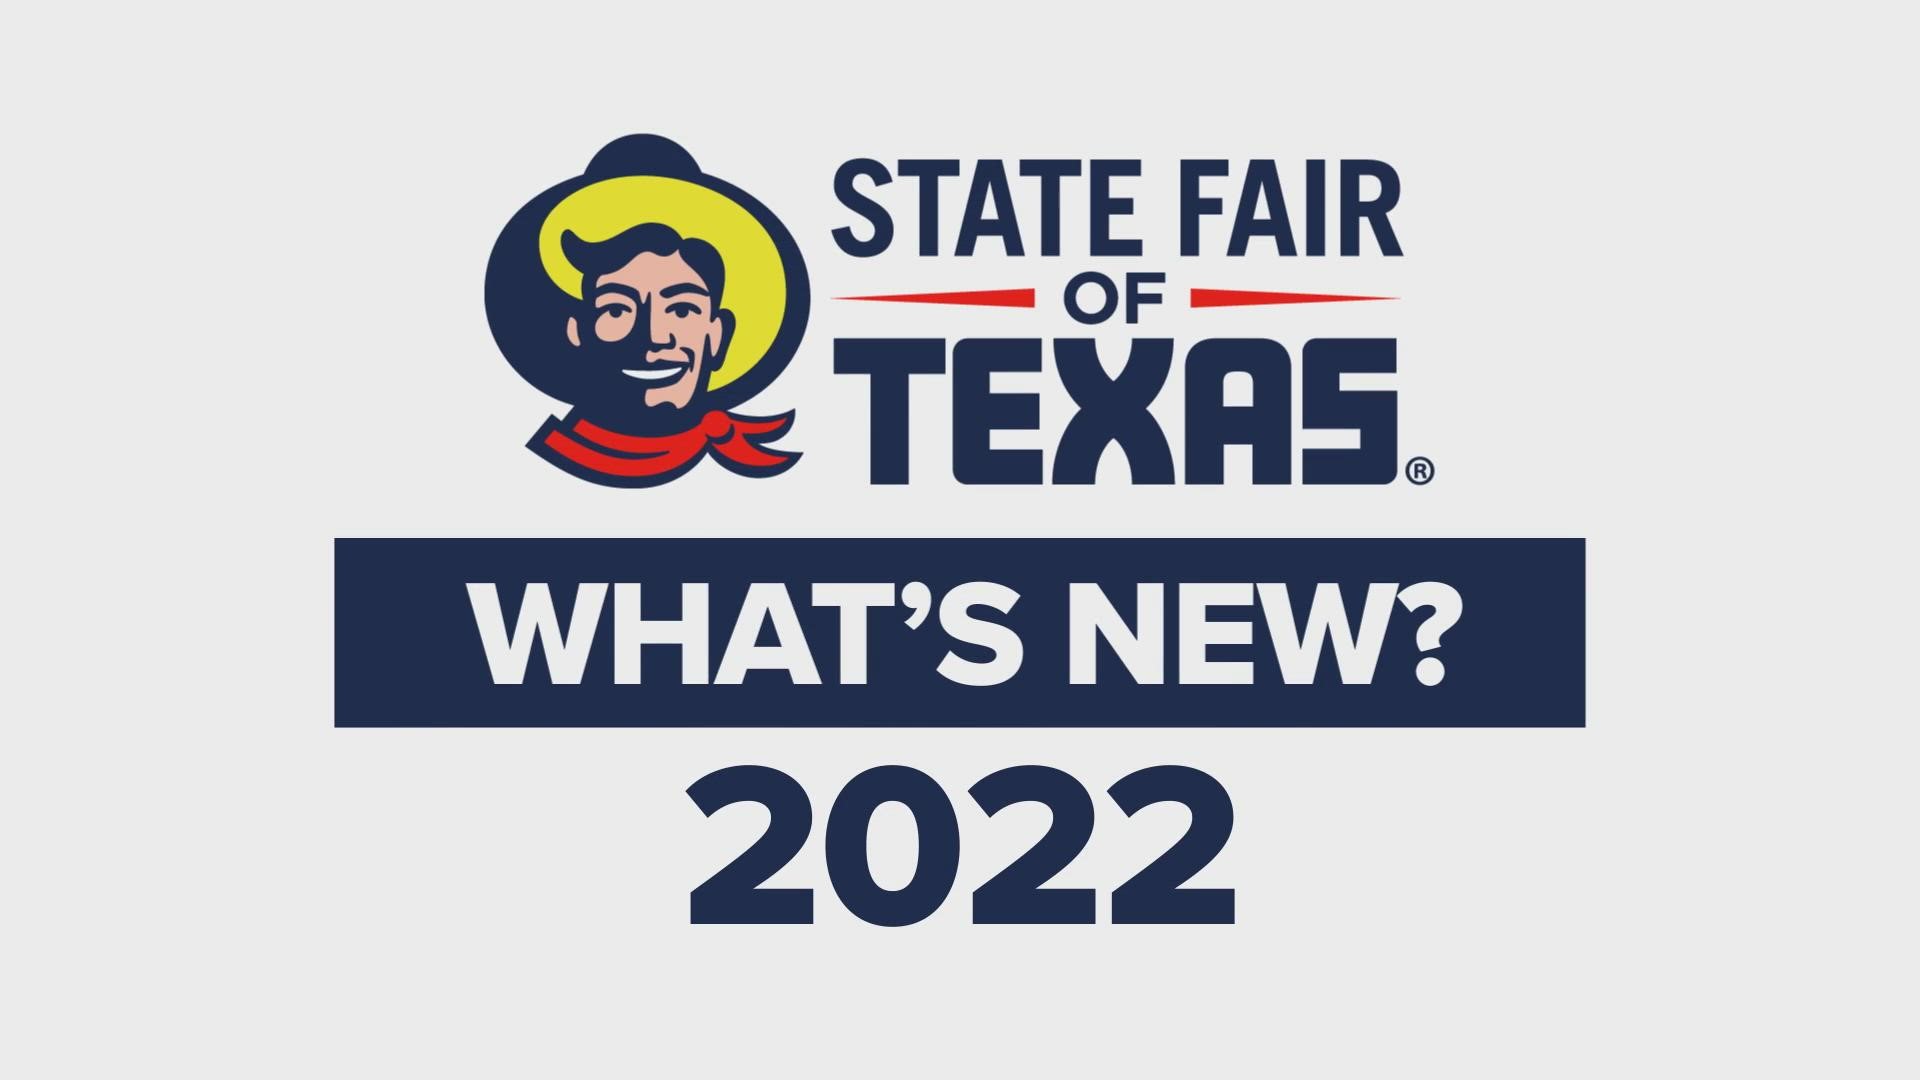 There's a lot of new experiences at the 2022 State Fair of Texas